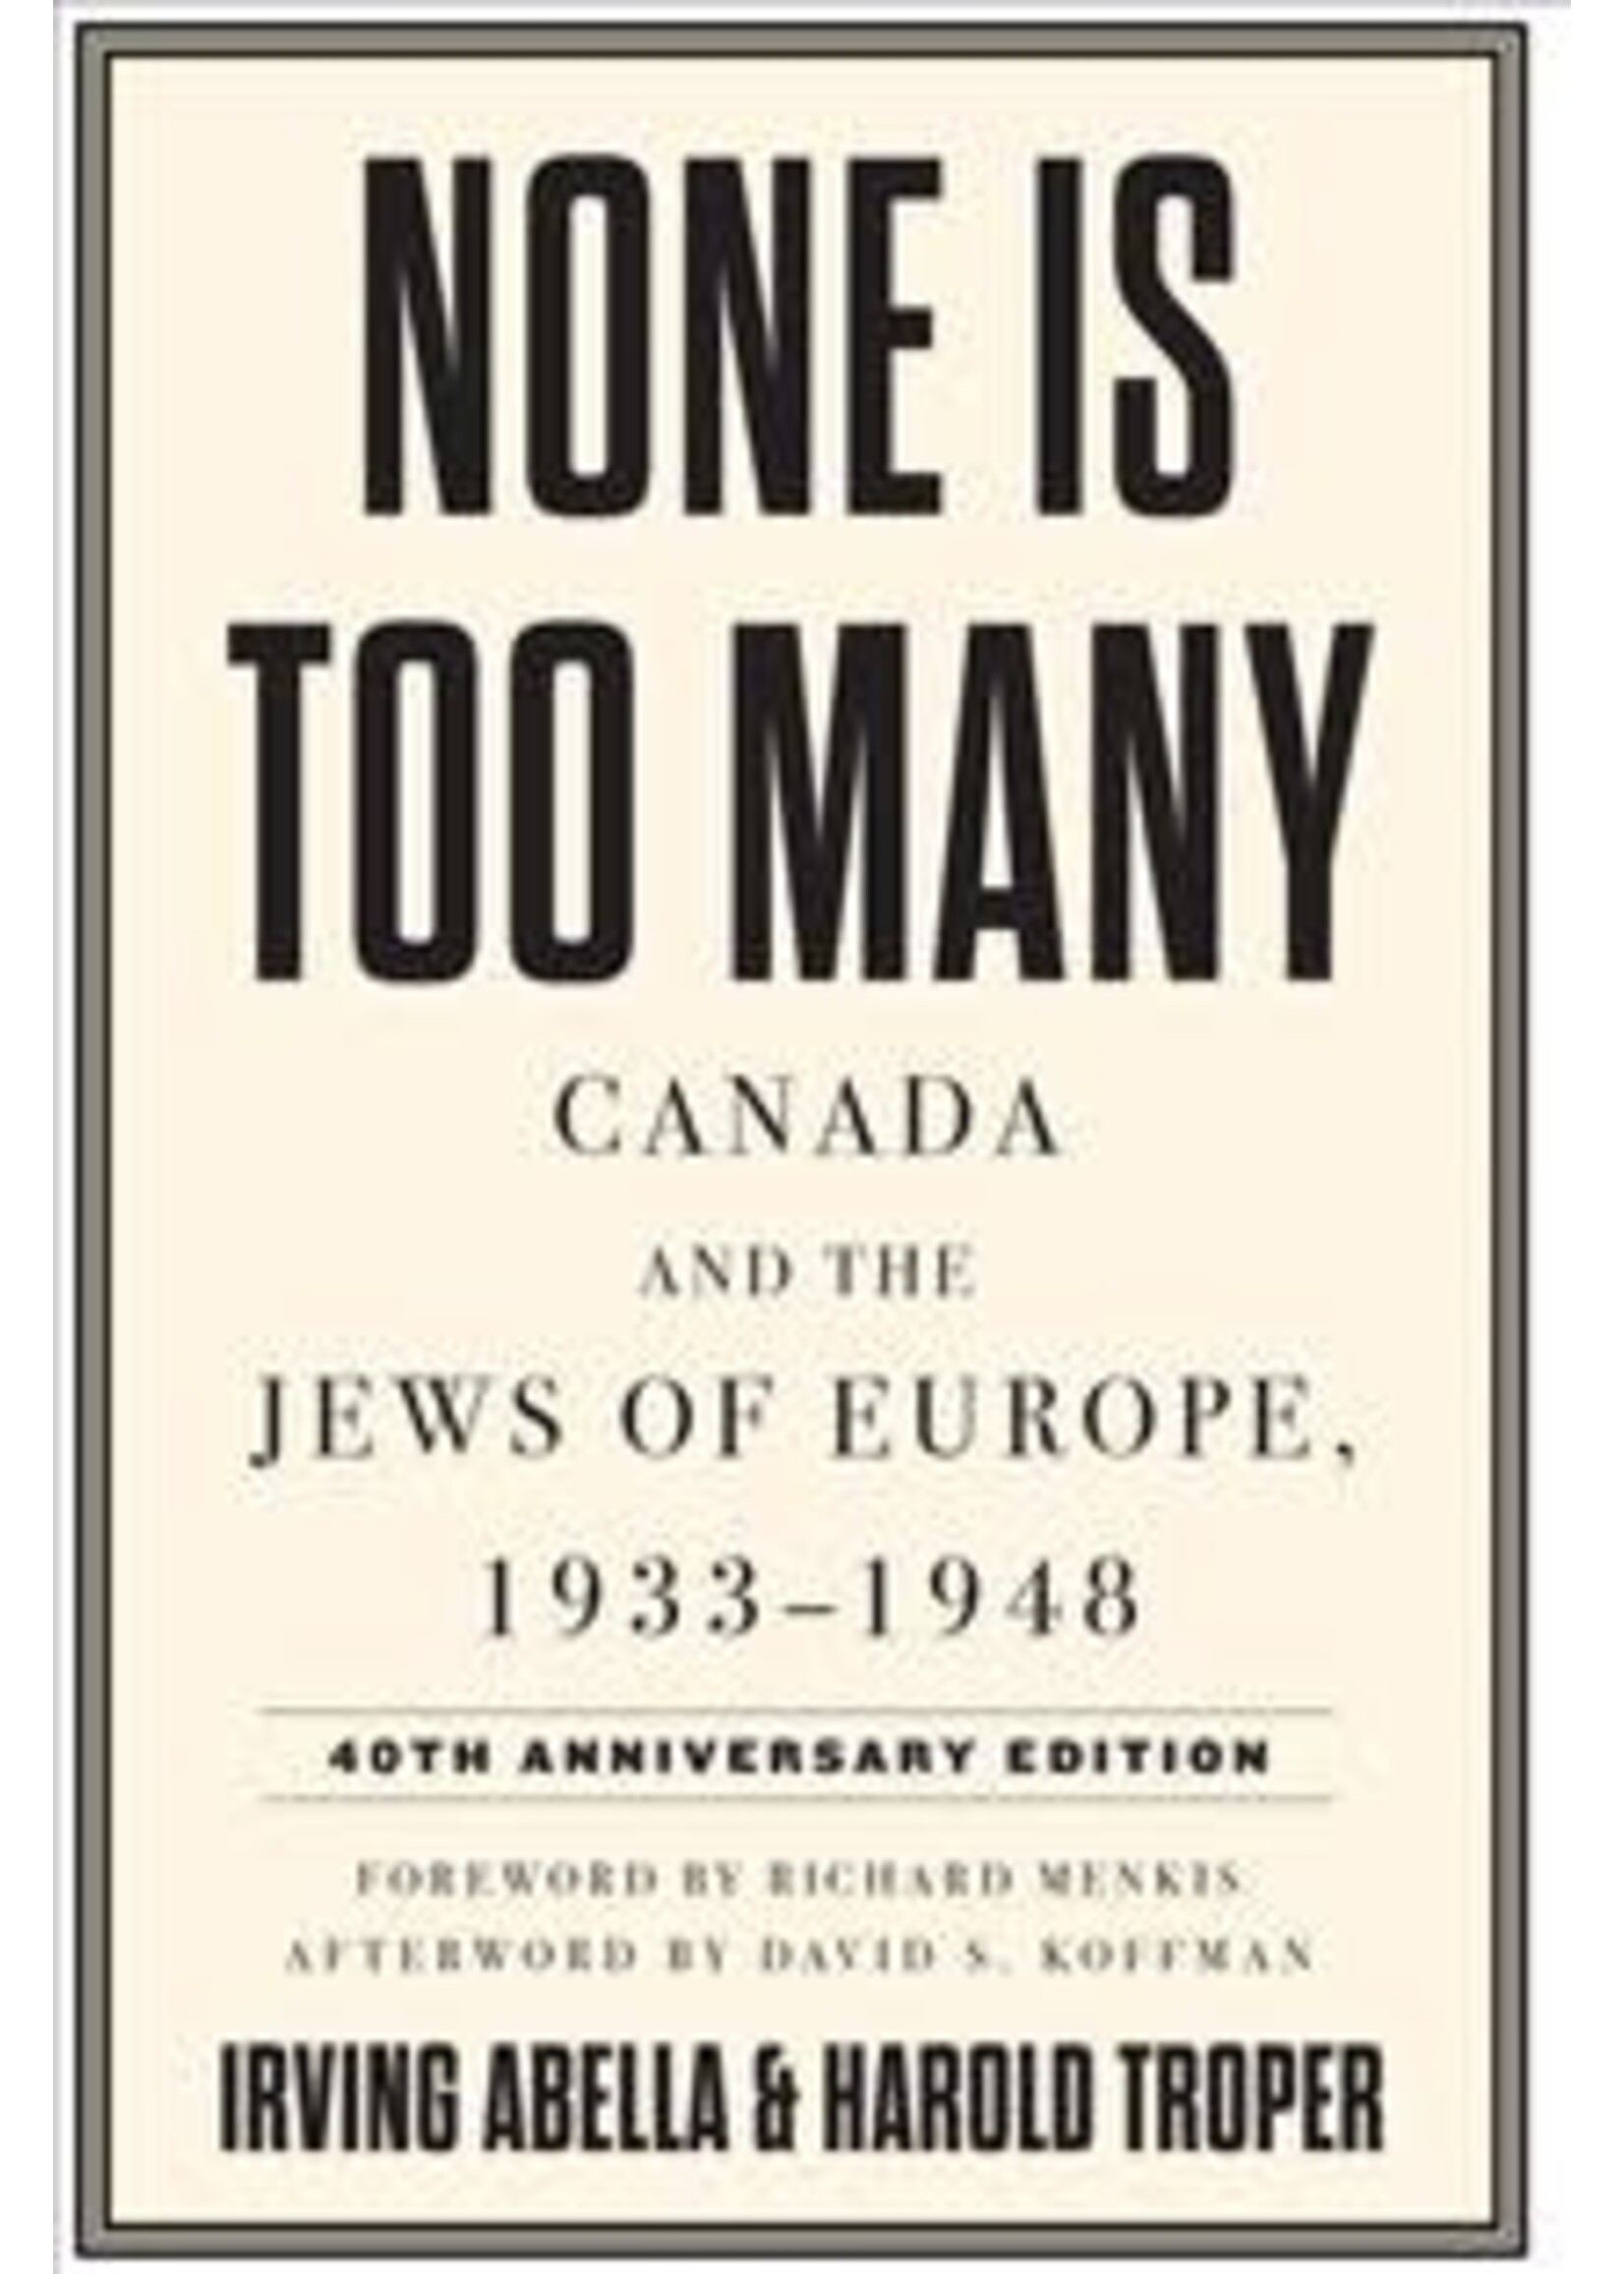 None Is Too Many: Canada and the Jews of Europe, 1933-1948 by Irving Abella, Harold Troper